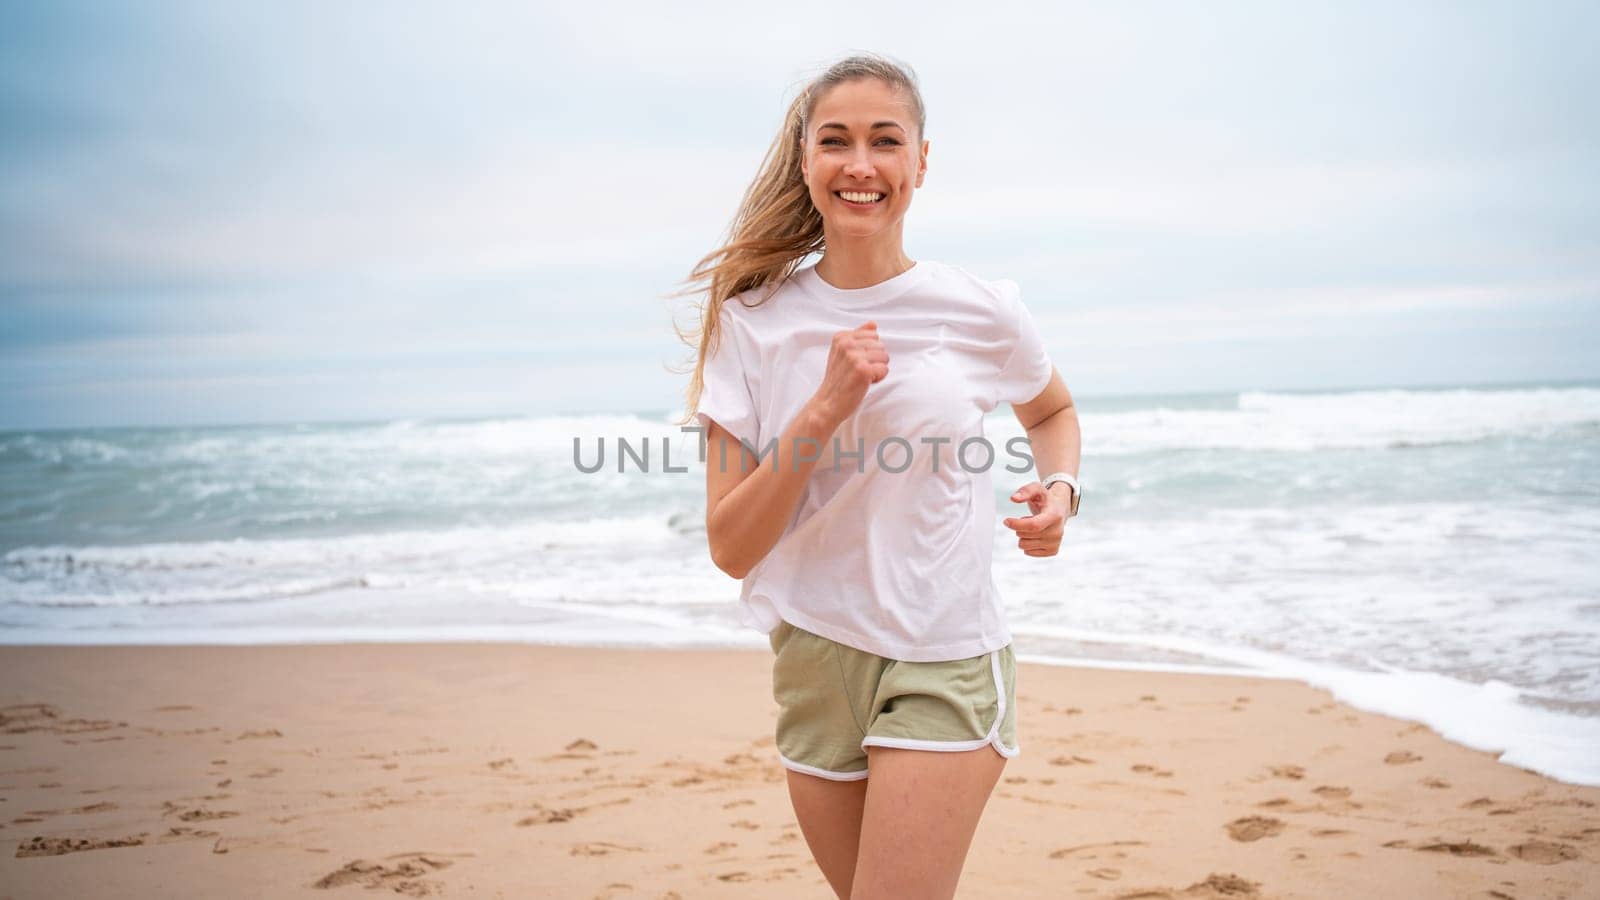 Smiling female athlete jogging on sandy sea beach. Fit woman in white top and sporty shorts. Active lady running along shoreline represents healthy lifestyle.